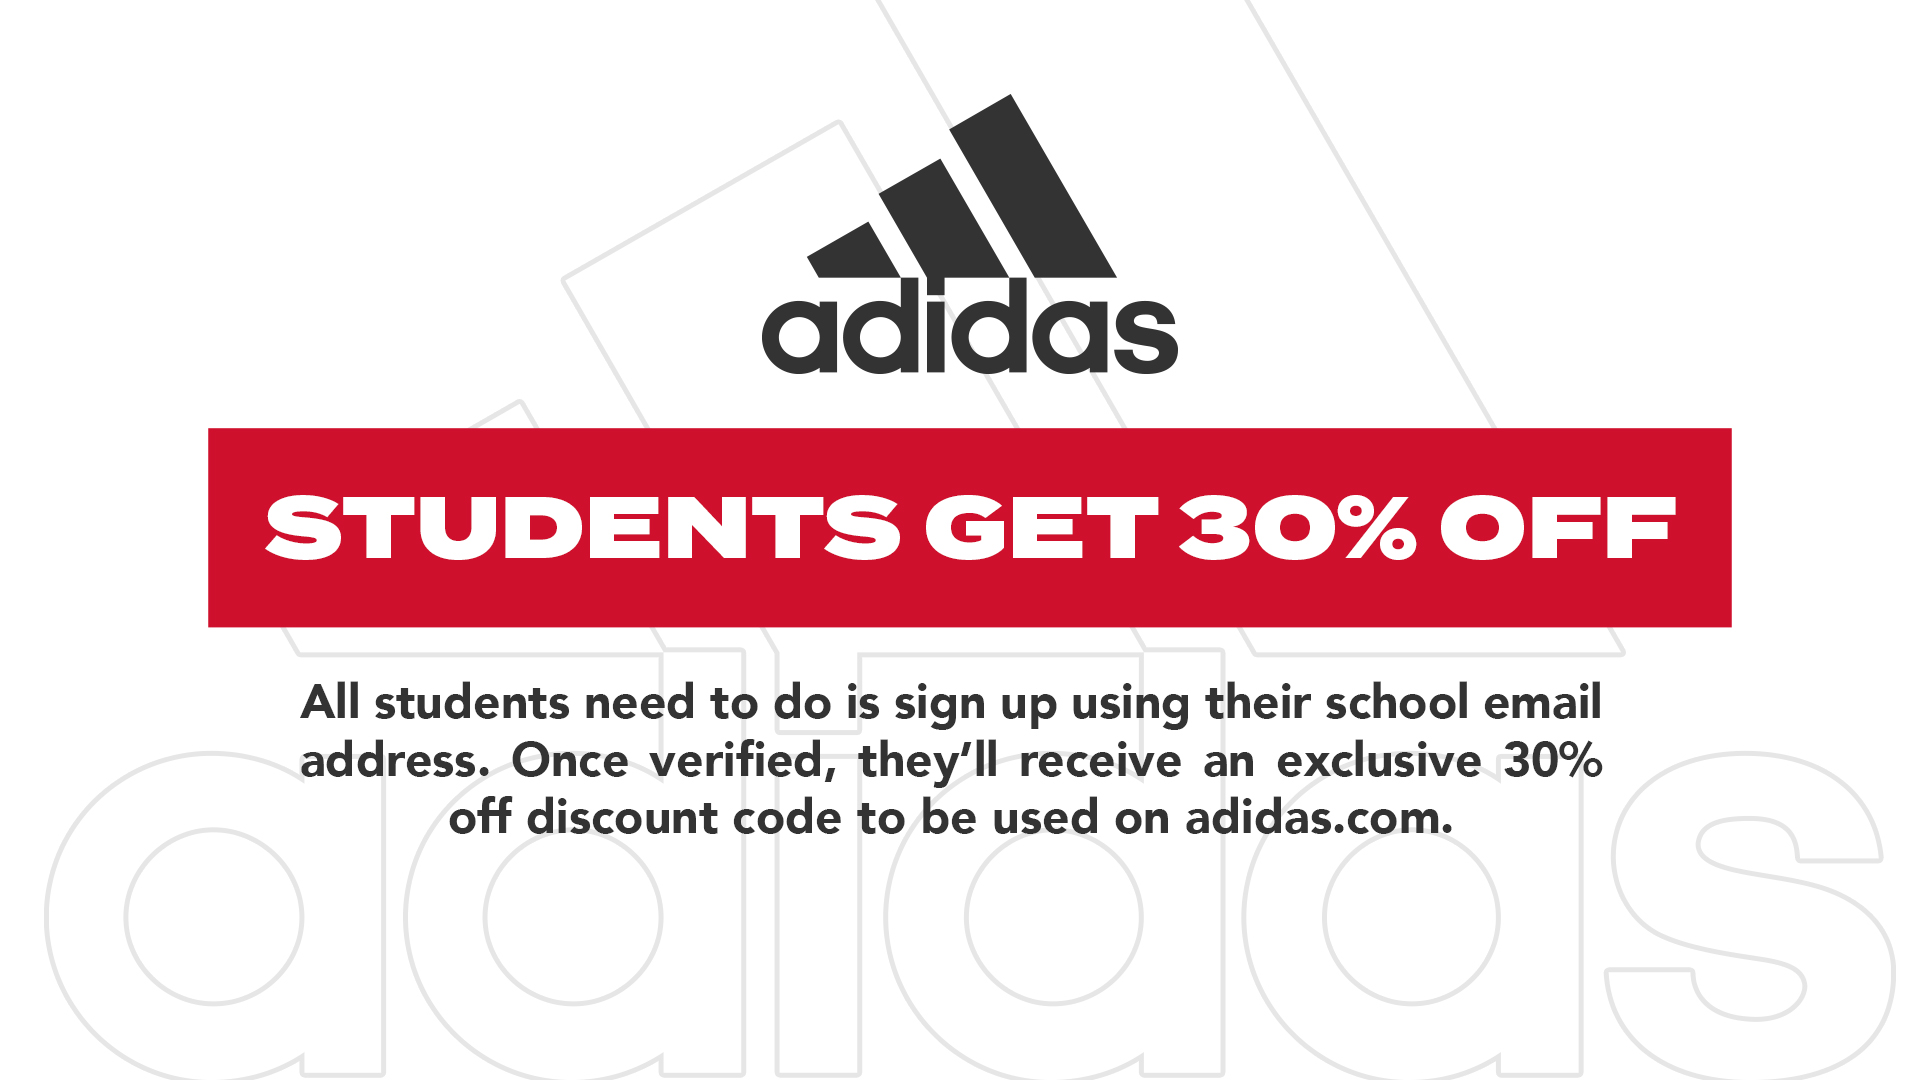 Rutgers Scarlet on Twitter: part of the @adidas family, we've partnered to secure all current Rutgers students an exclusive discount! Verify your student here: https://t.co/BaVI6QyMqS #teamadidas https://t.co/8wqgkNRYKv" / Twitter